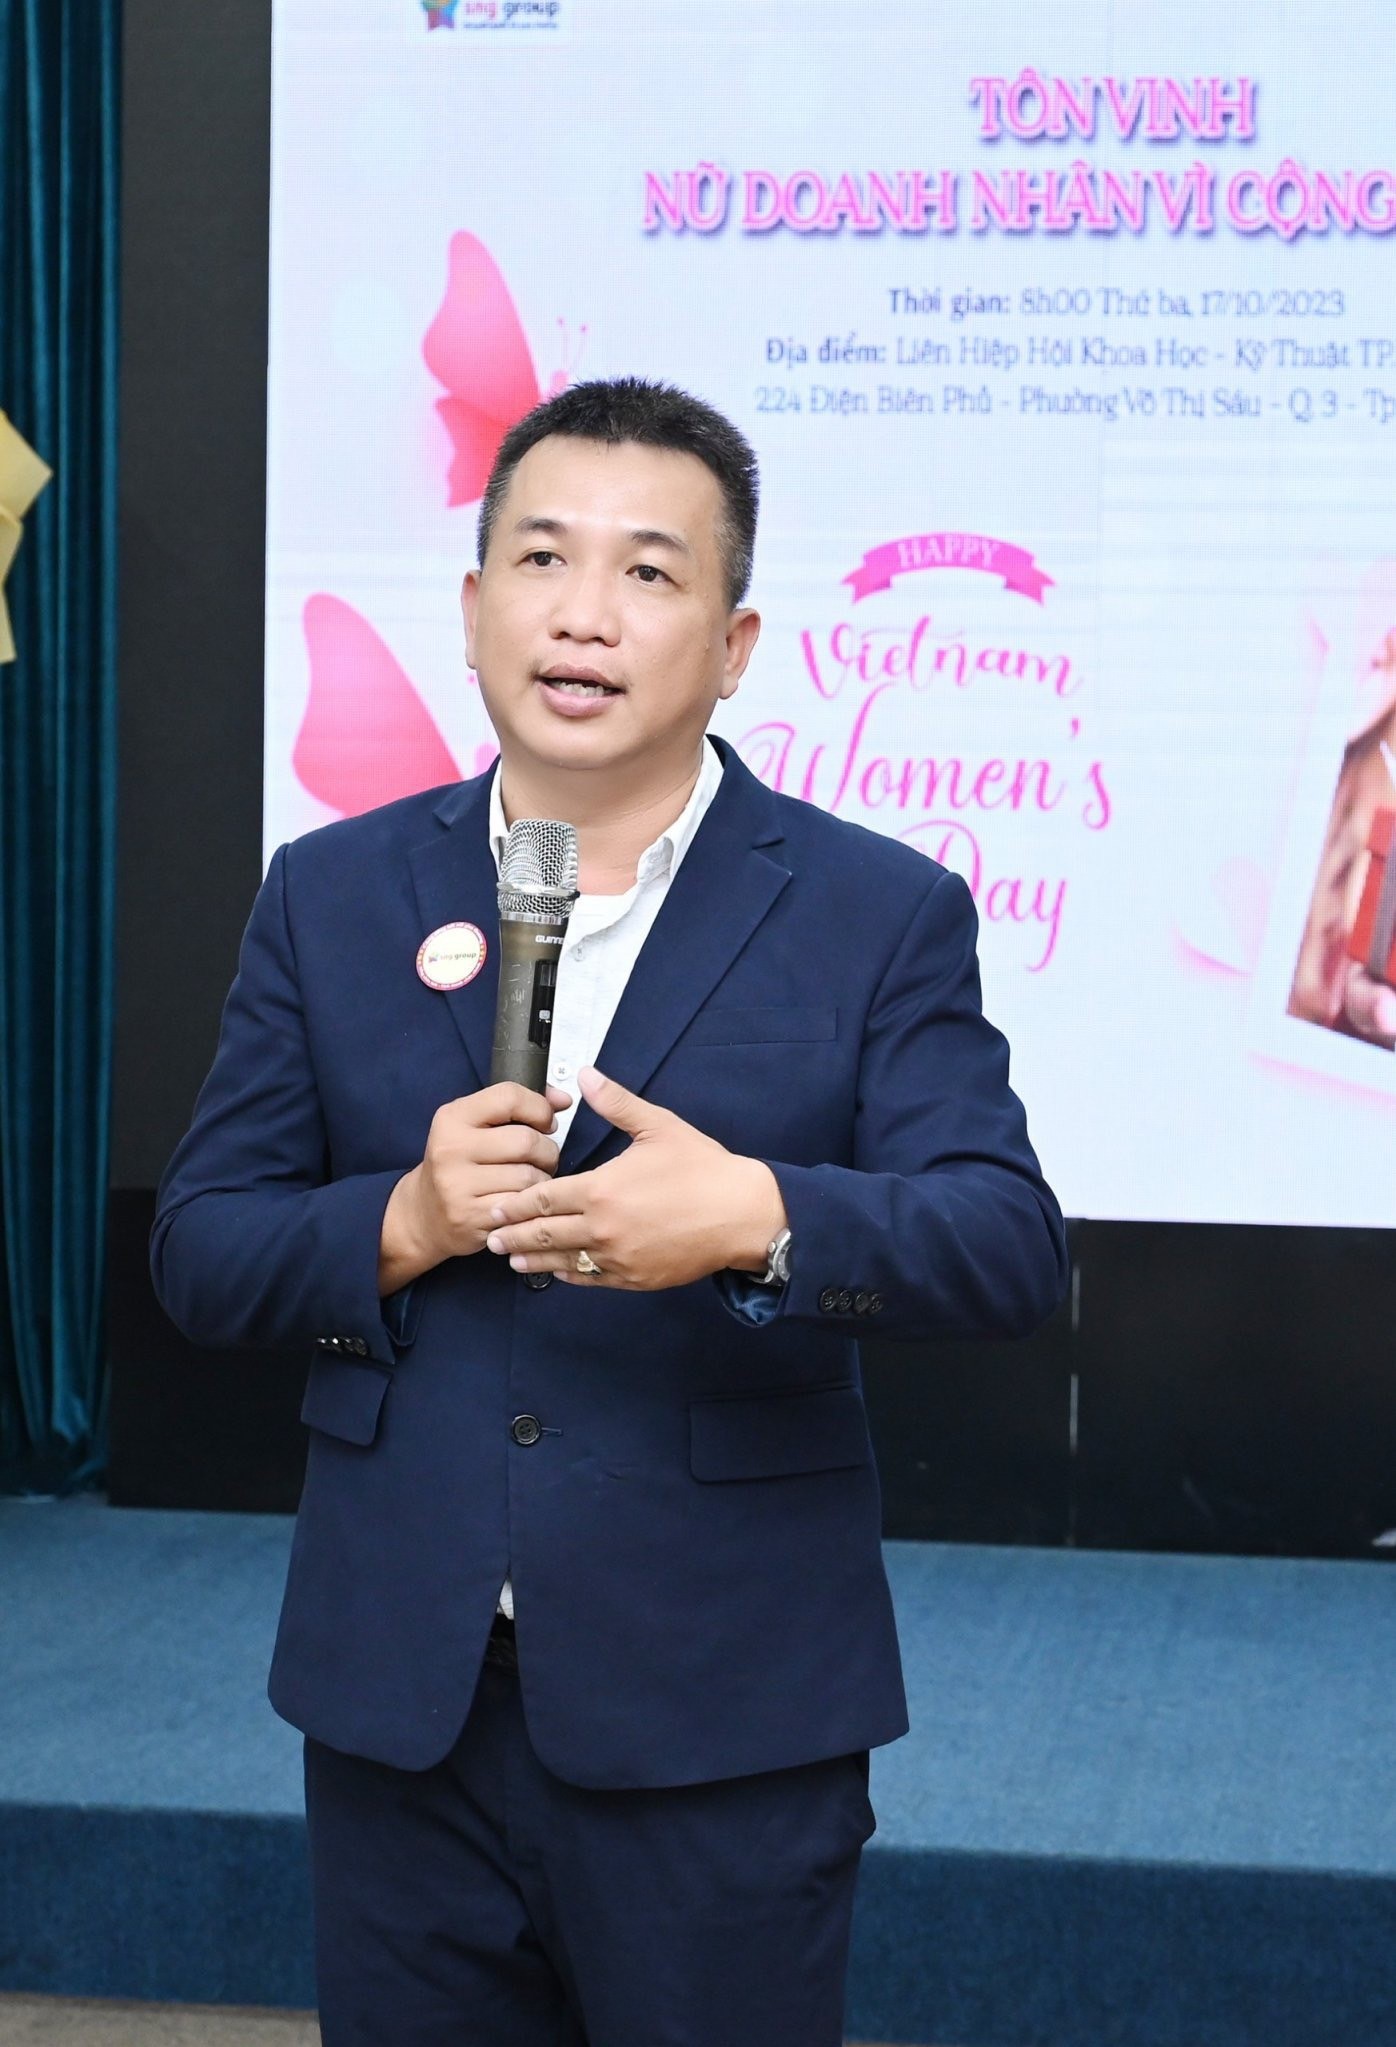 Mr. Tony Tran - Founder of the trading connection community SNG Group.